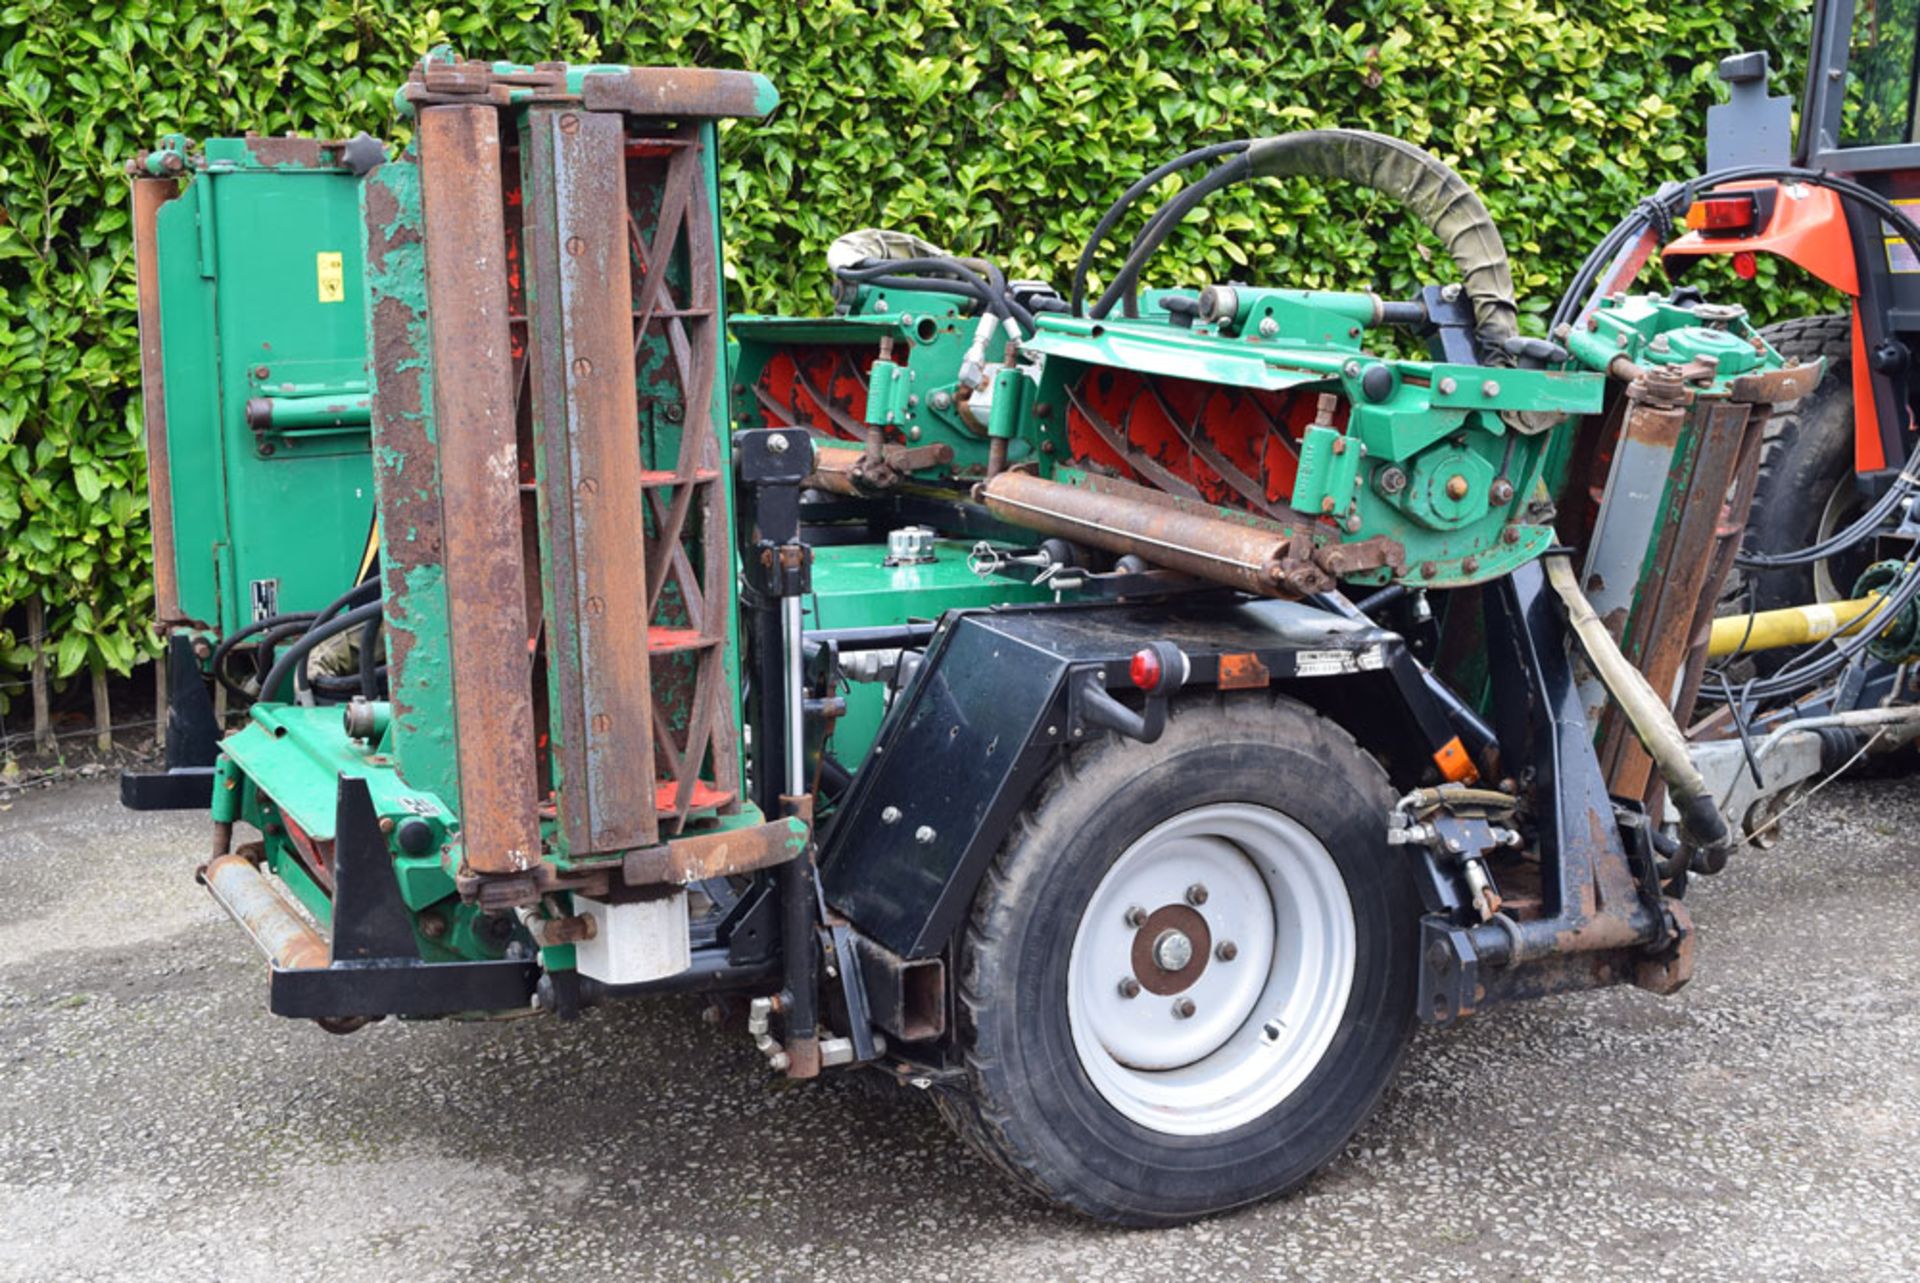 2009 Ransomes TG4650 Tractor Mount Trailed Cylinder Gang Mower - Image 7 of 13